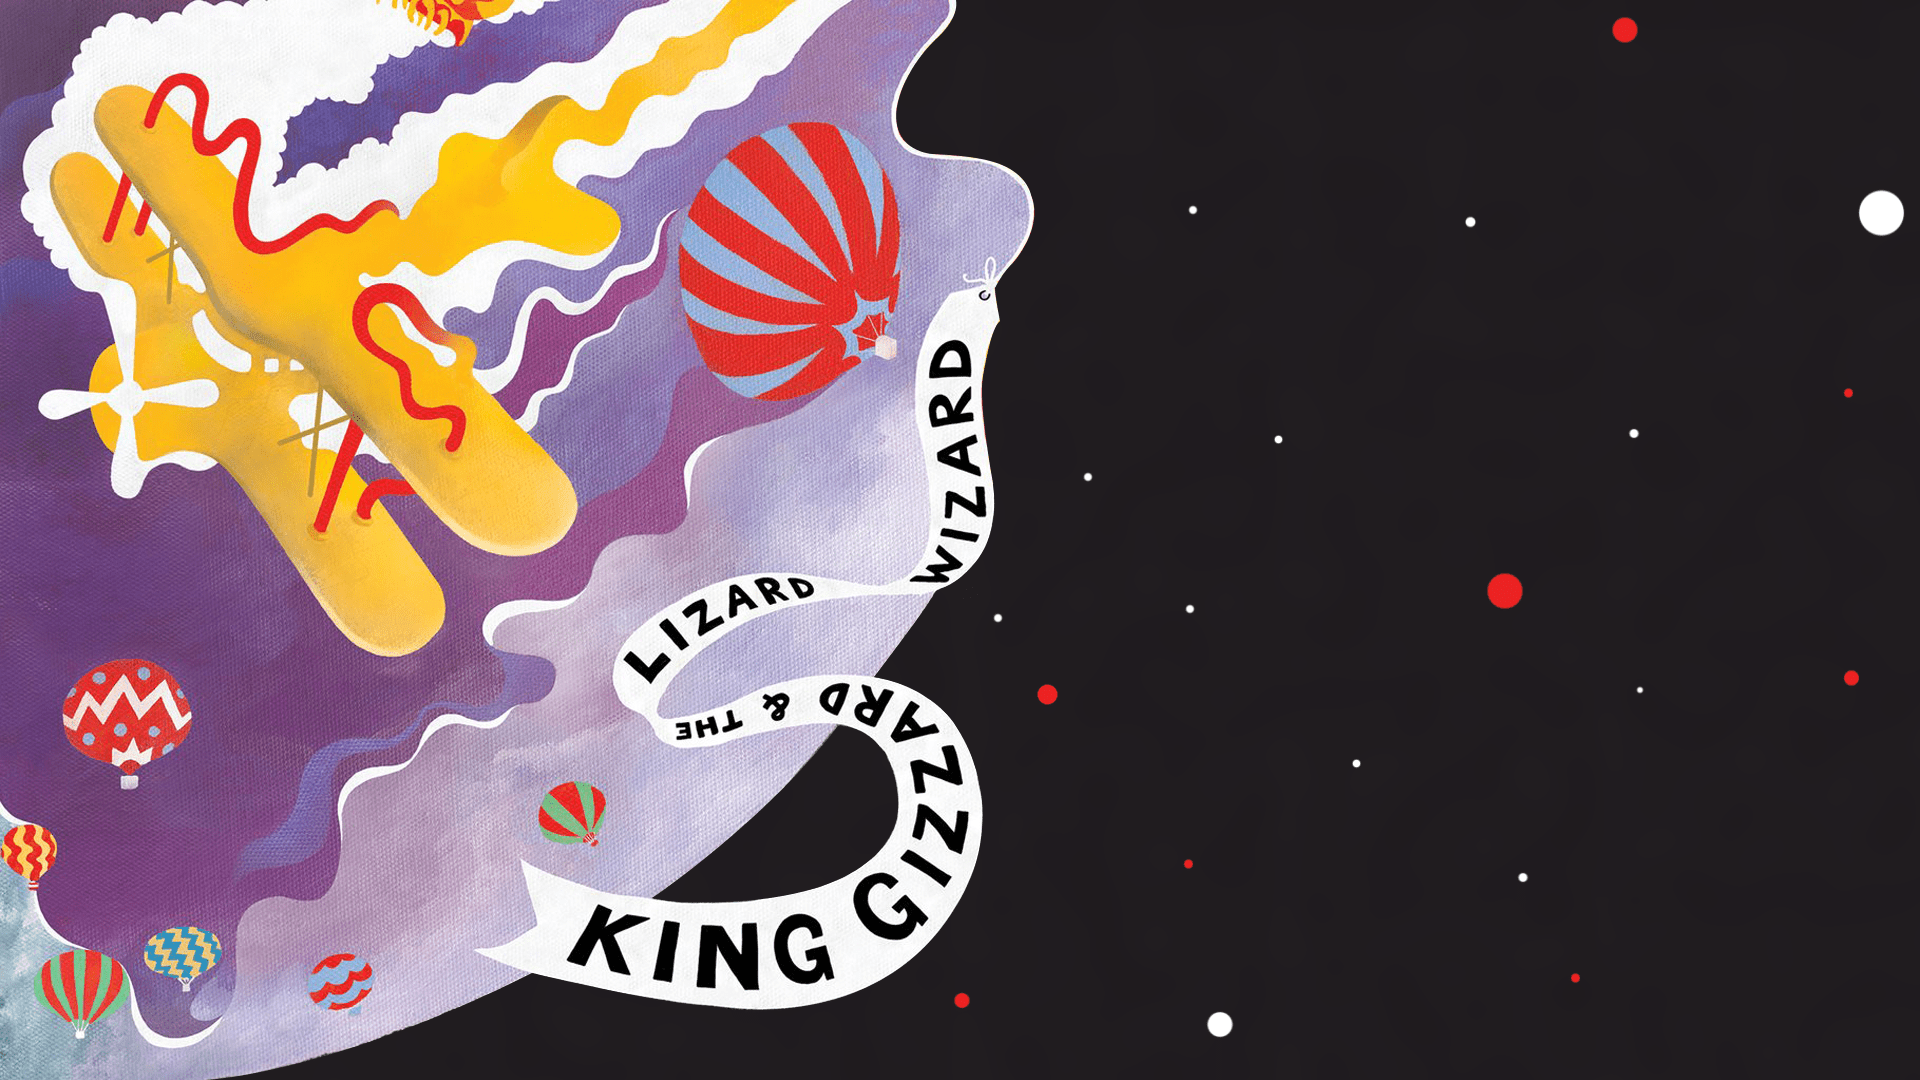 King Gizzard and the Lizard Wizard  Live iPhone 8 Wallpaper on Vimeo